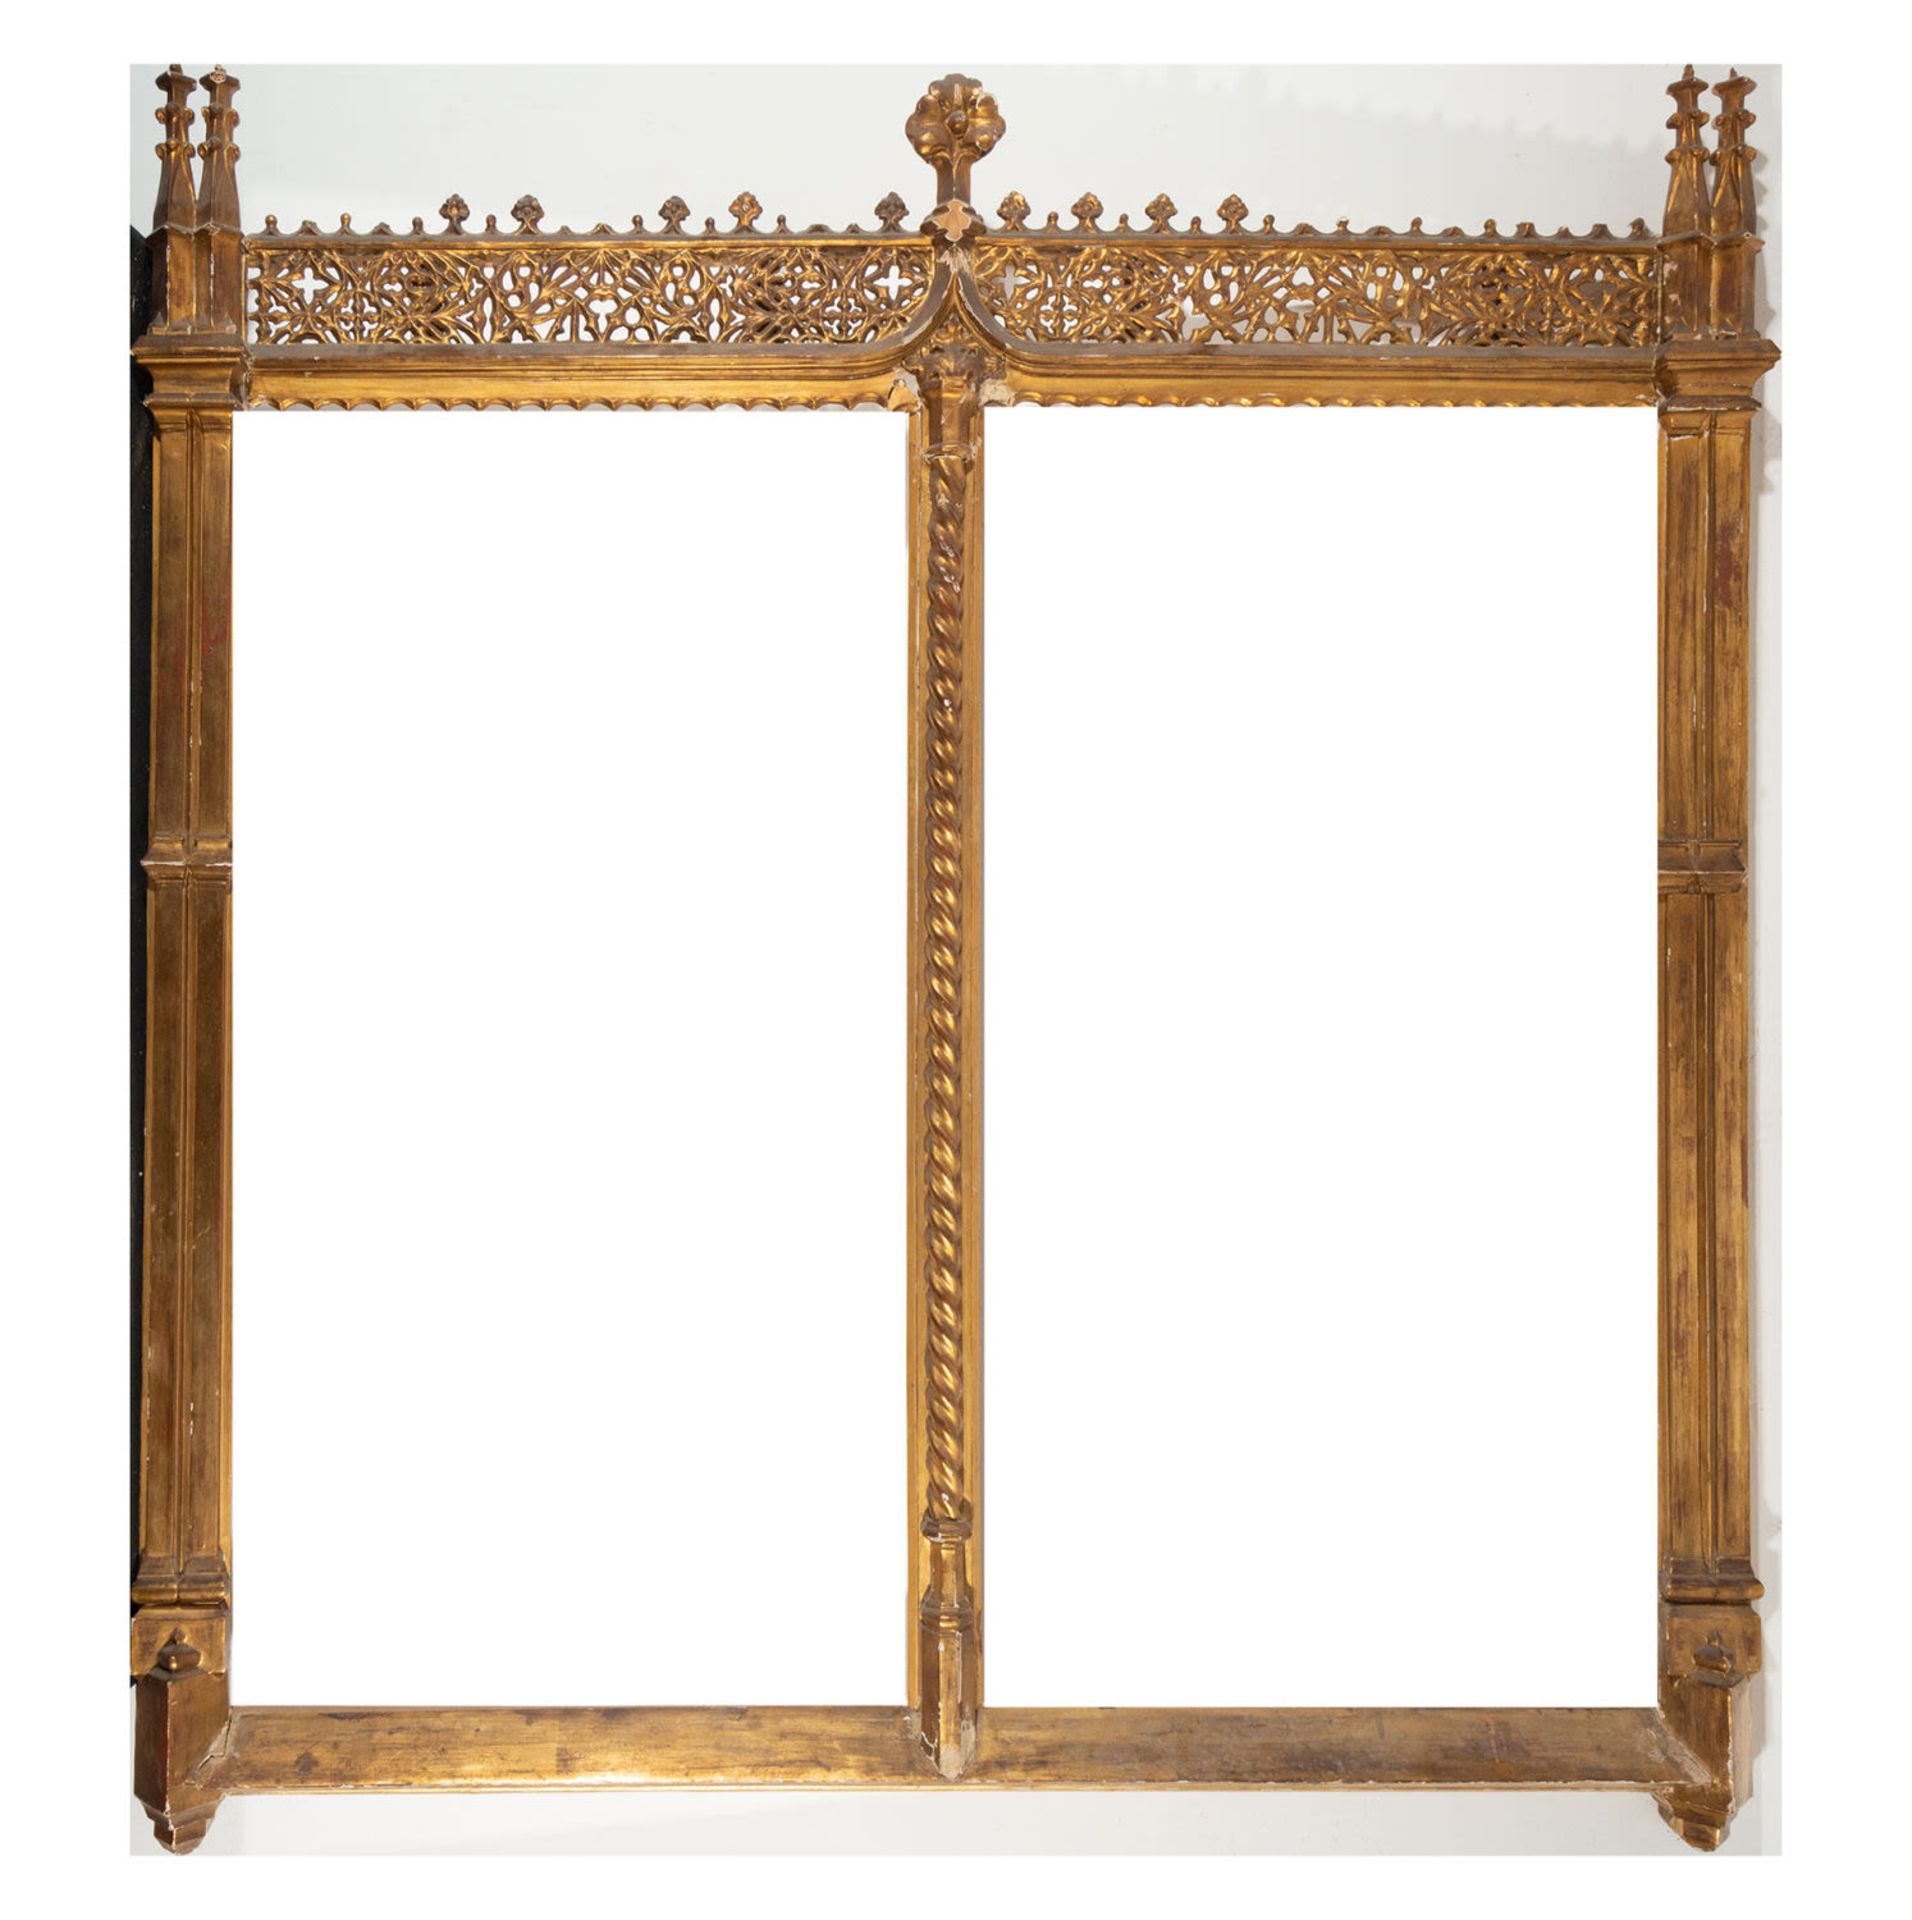 Neo-Gothic diptych type frame in gilded wood, XIX century